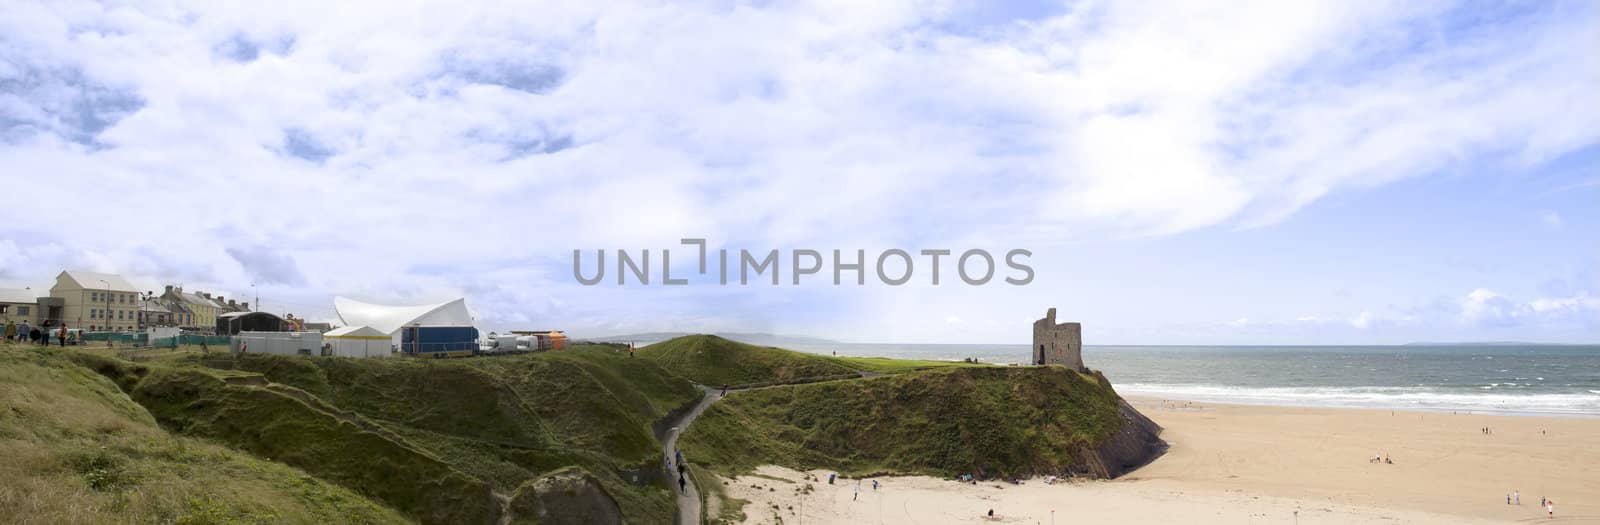 ballybunion in summer with panaramic view of the town, castle and beach